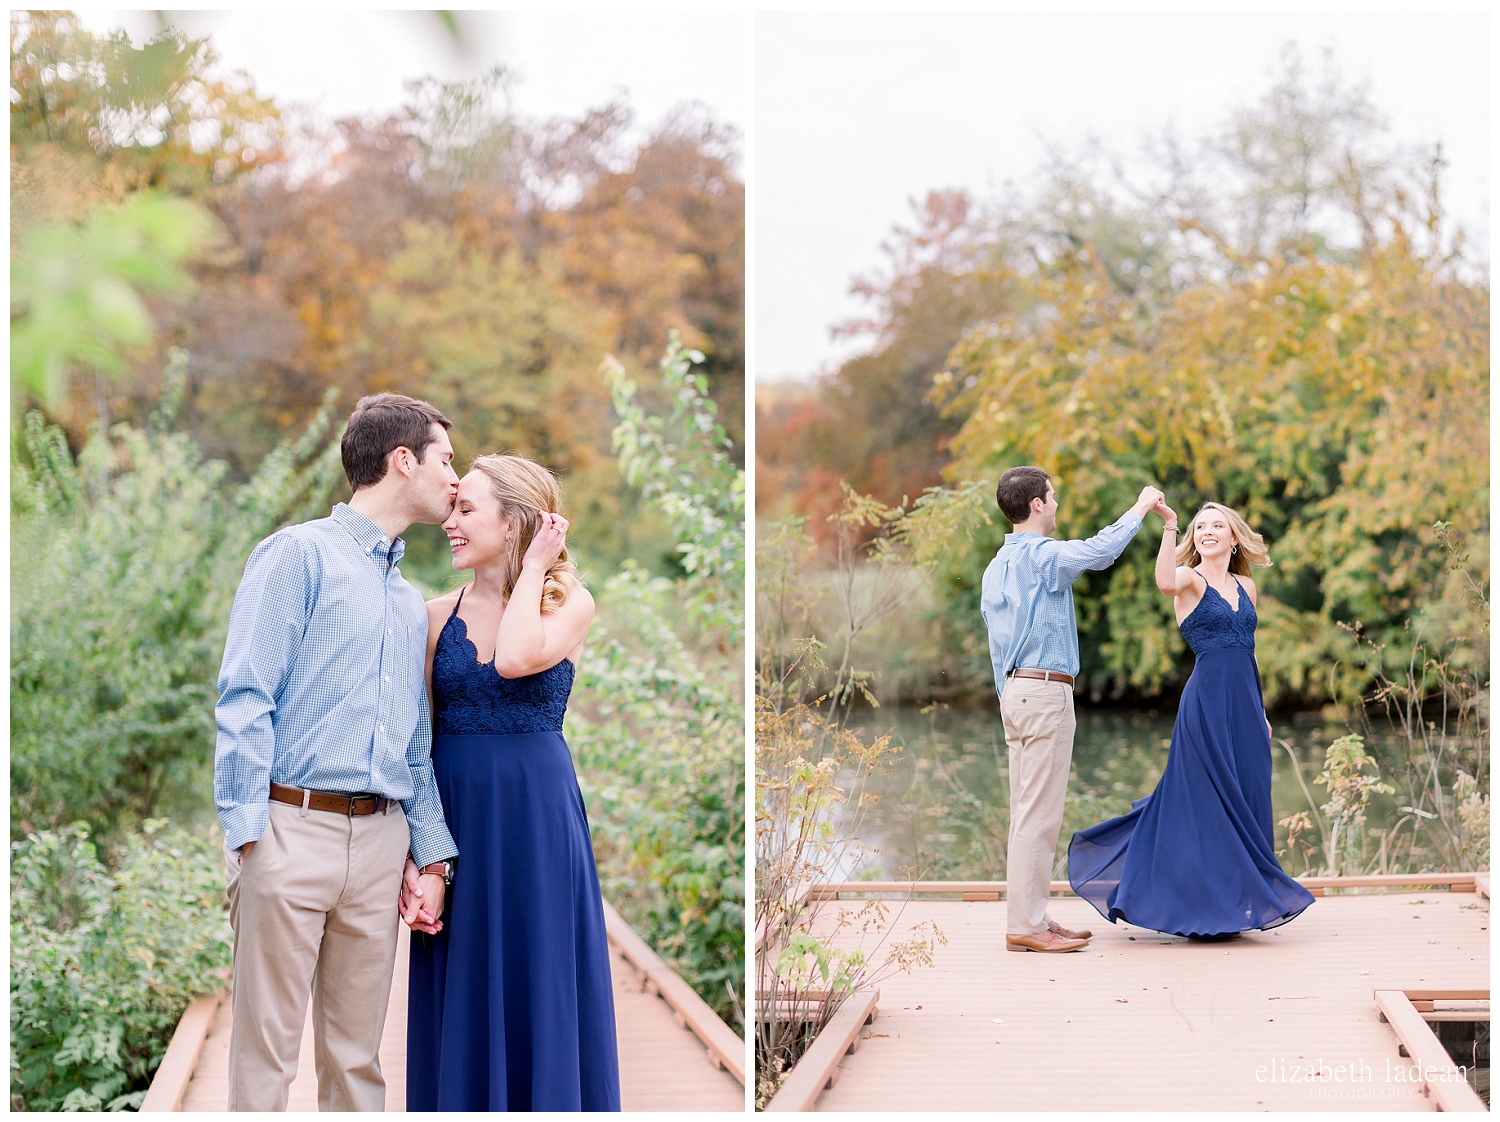 Colorful-Fall-Engagement-Photos-in-KC-C+B-2018-elizabeth-ladean-photography-photo_1806.jpg